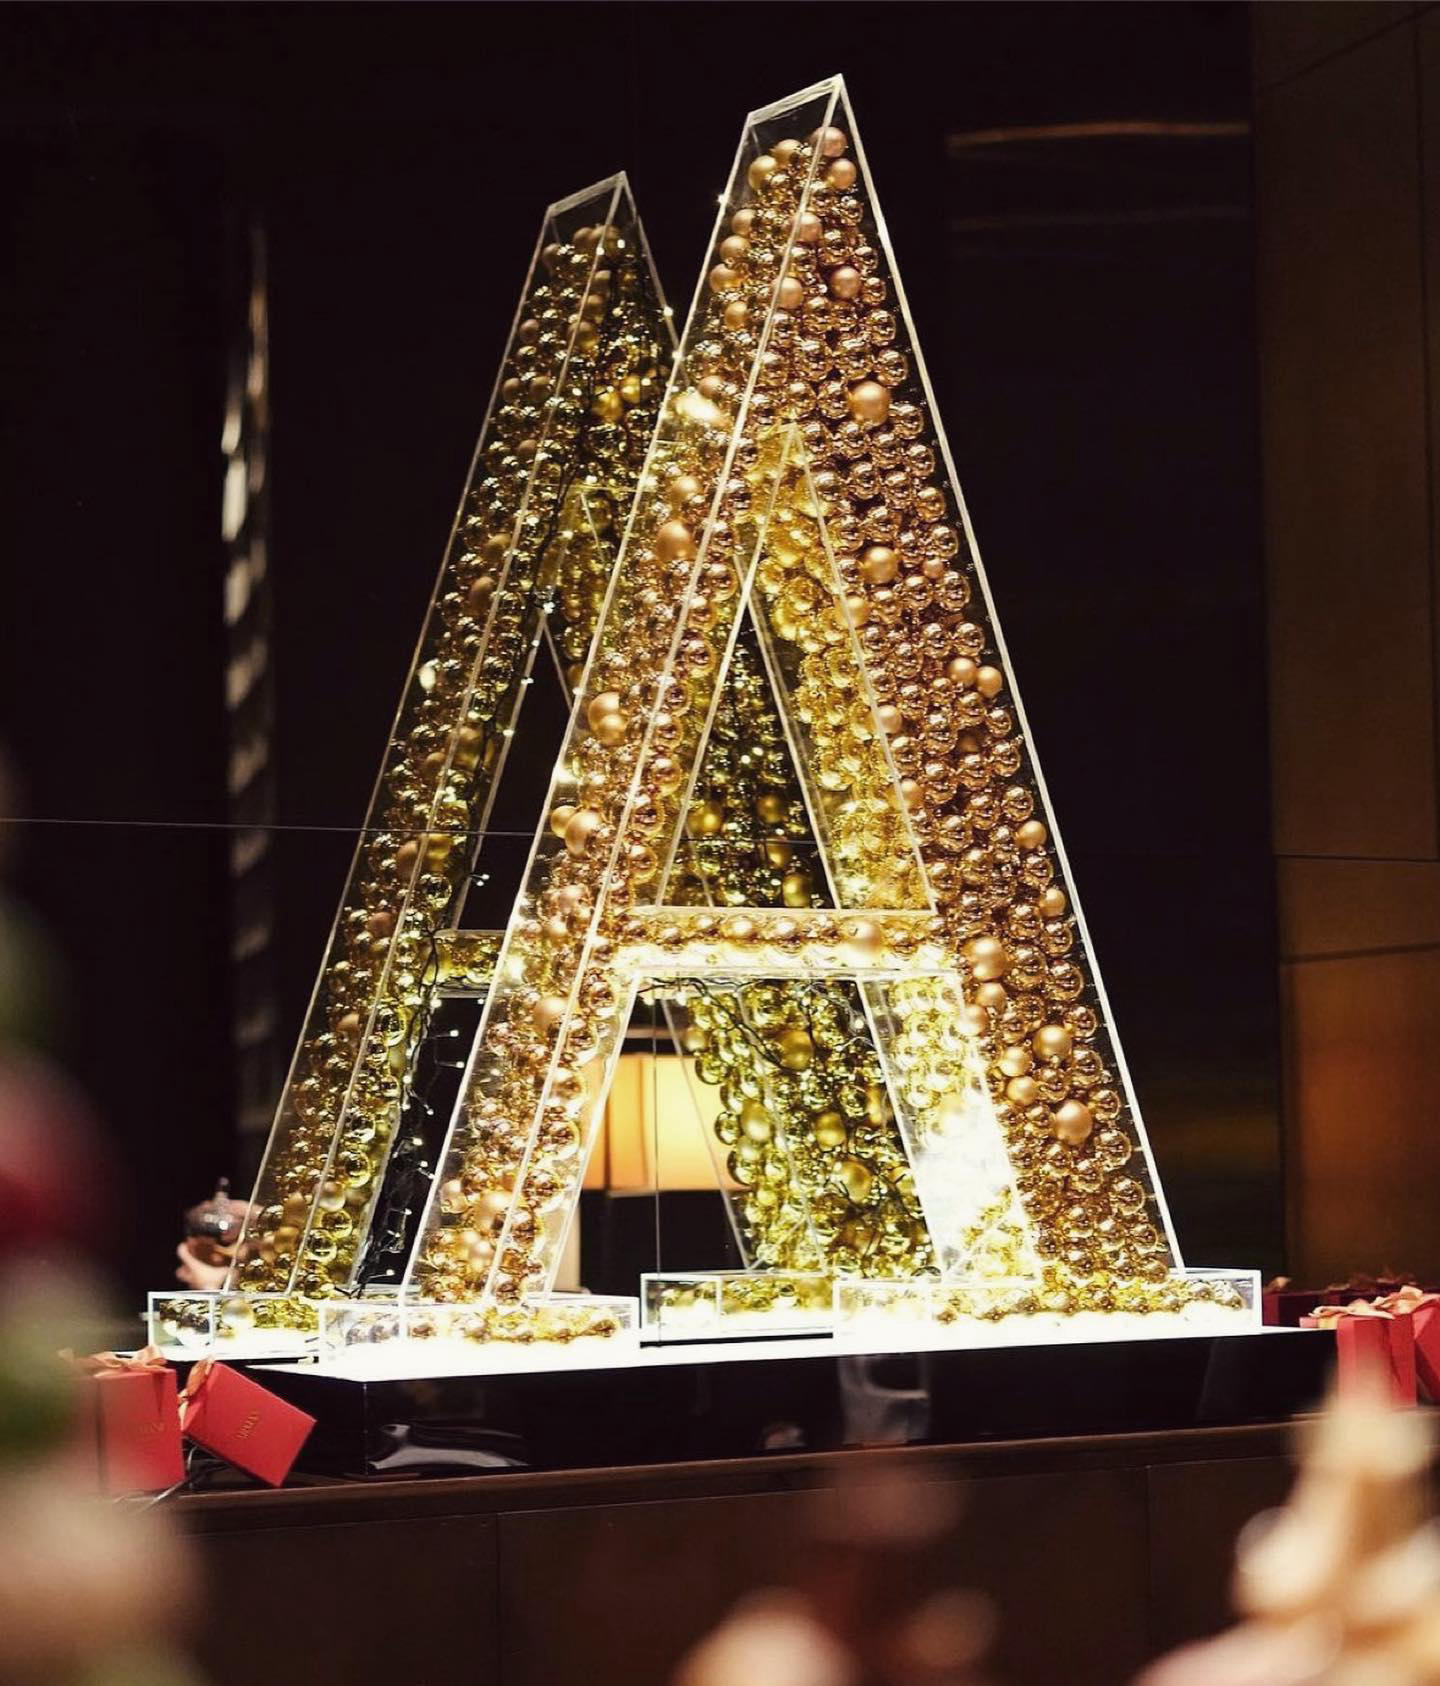 Armani Hotel Dubai - Visit our festive desk in the hotel lobby to reserve your magical Christmas or